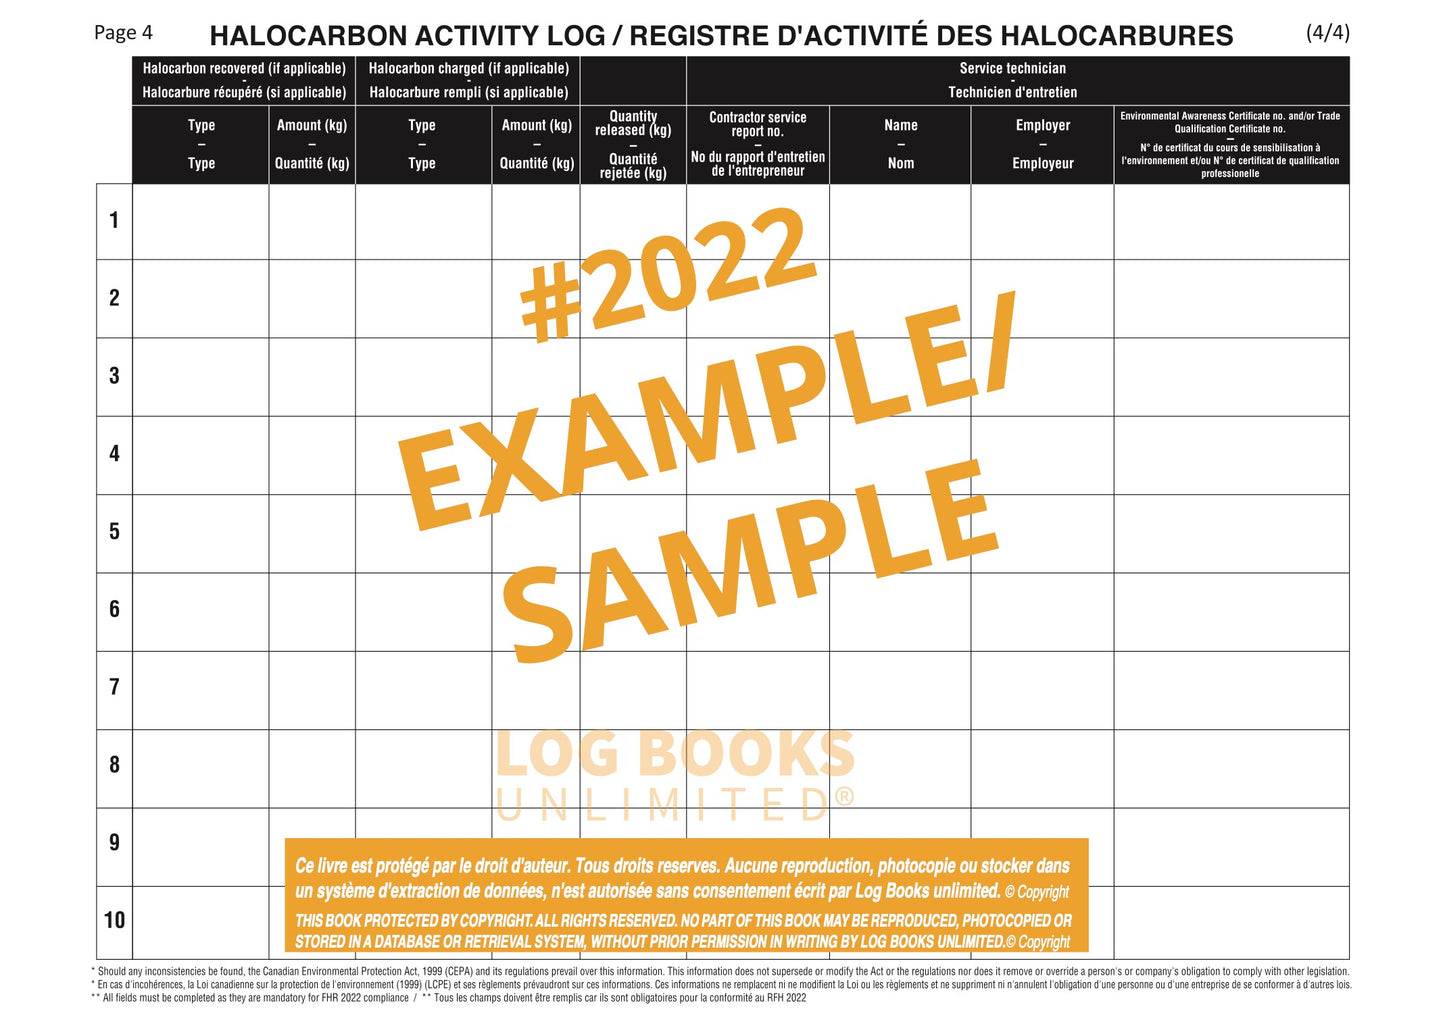 an example of halocarbon activity log book